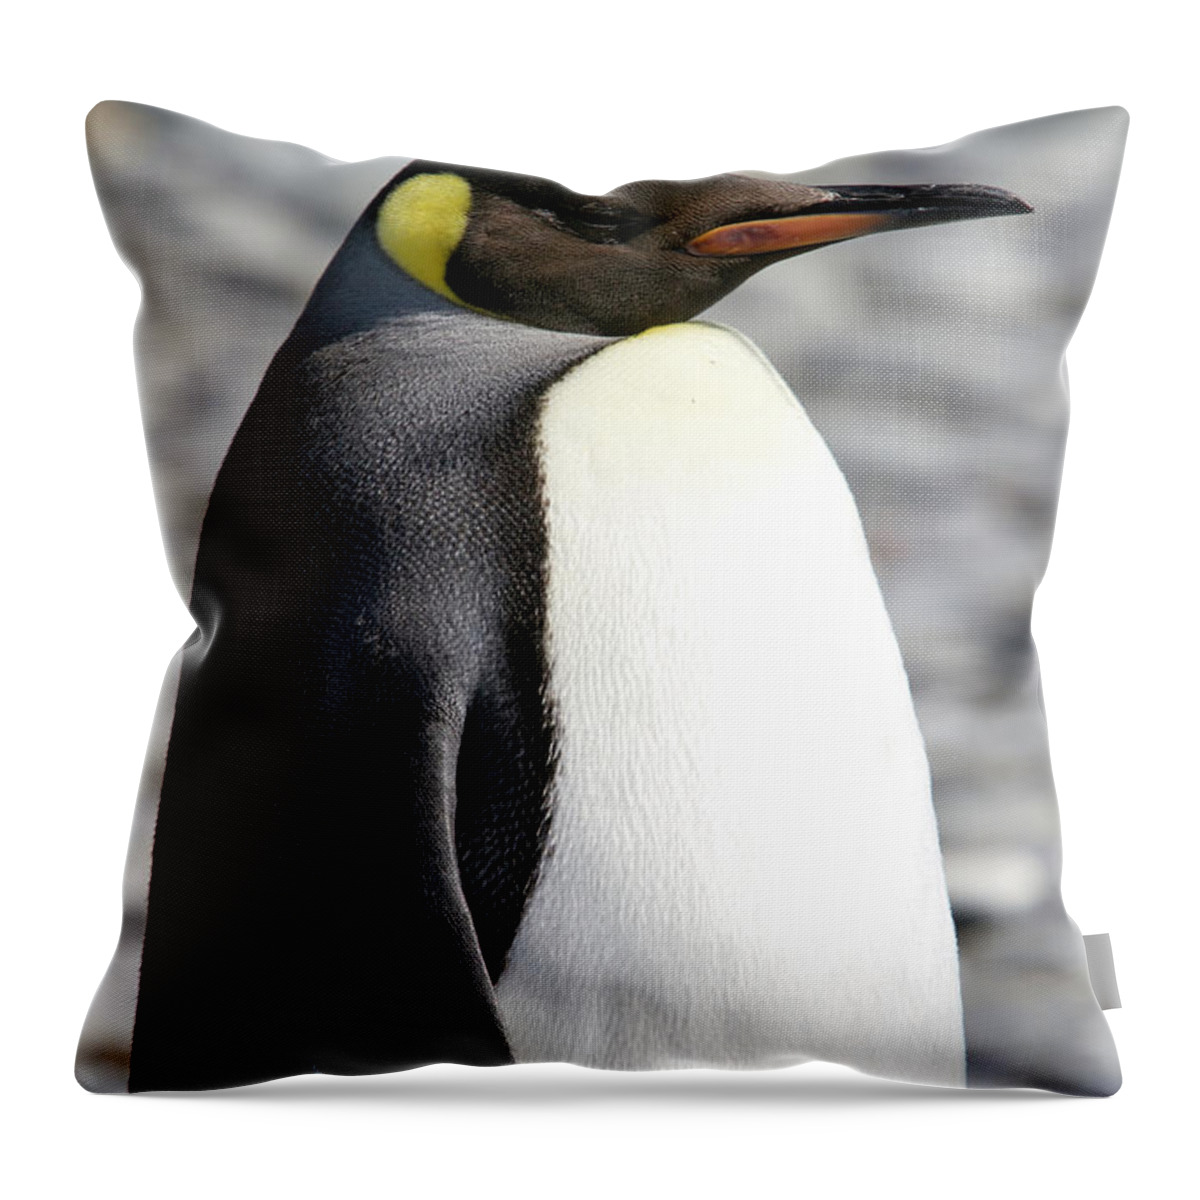 South Georgia Island Throw Pillow featuring the photograph King Penguins, Salisbury Plain, South by Angelika Stern